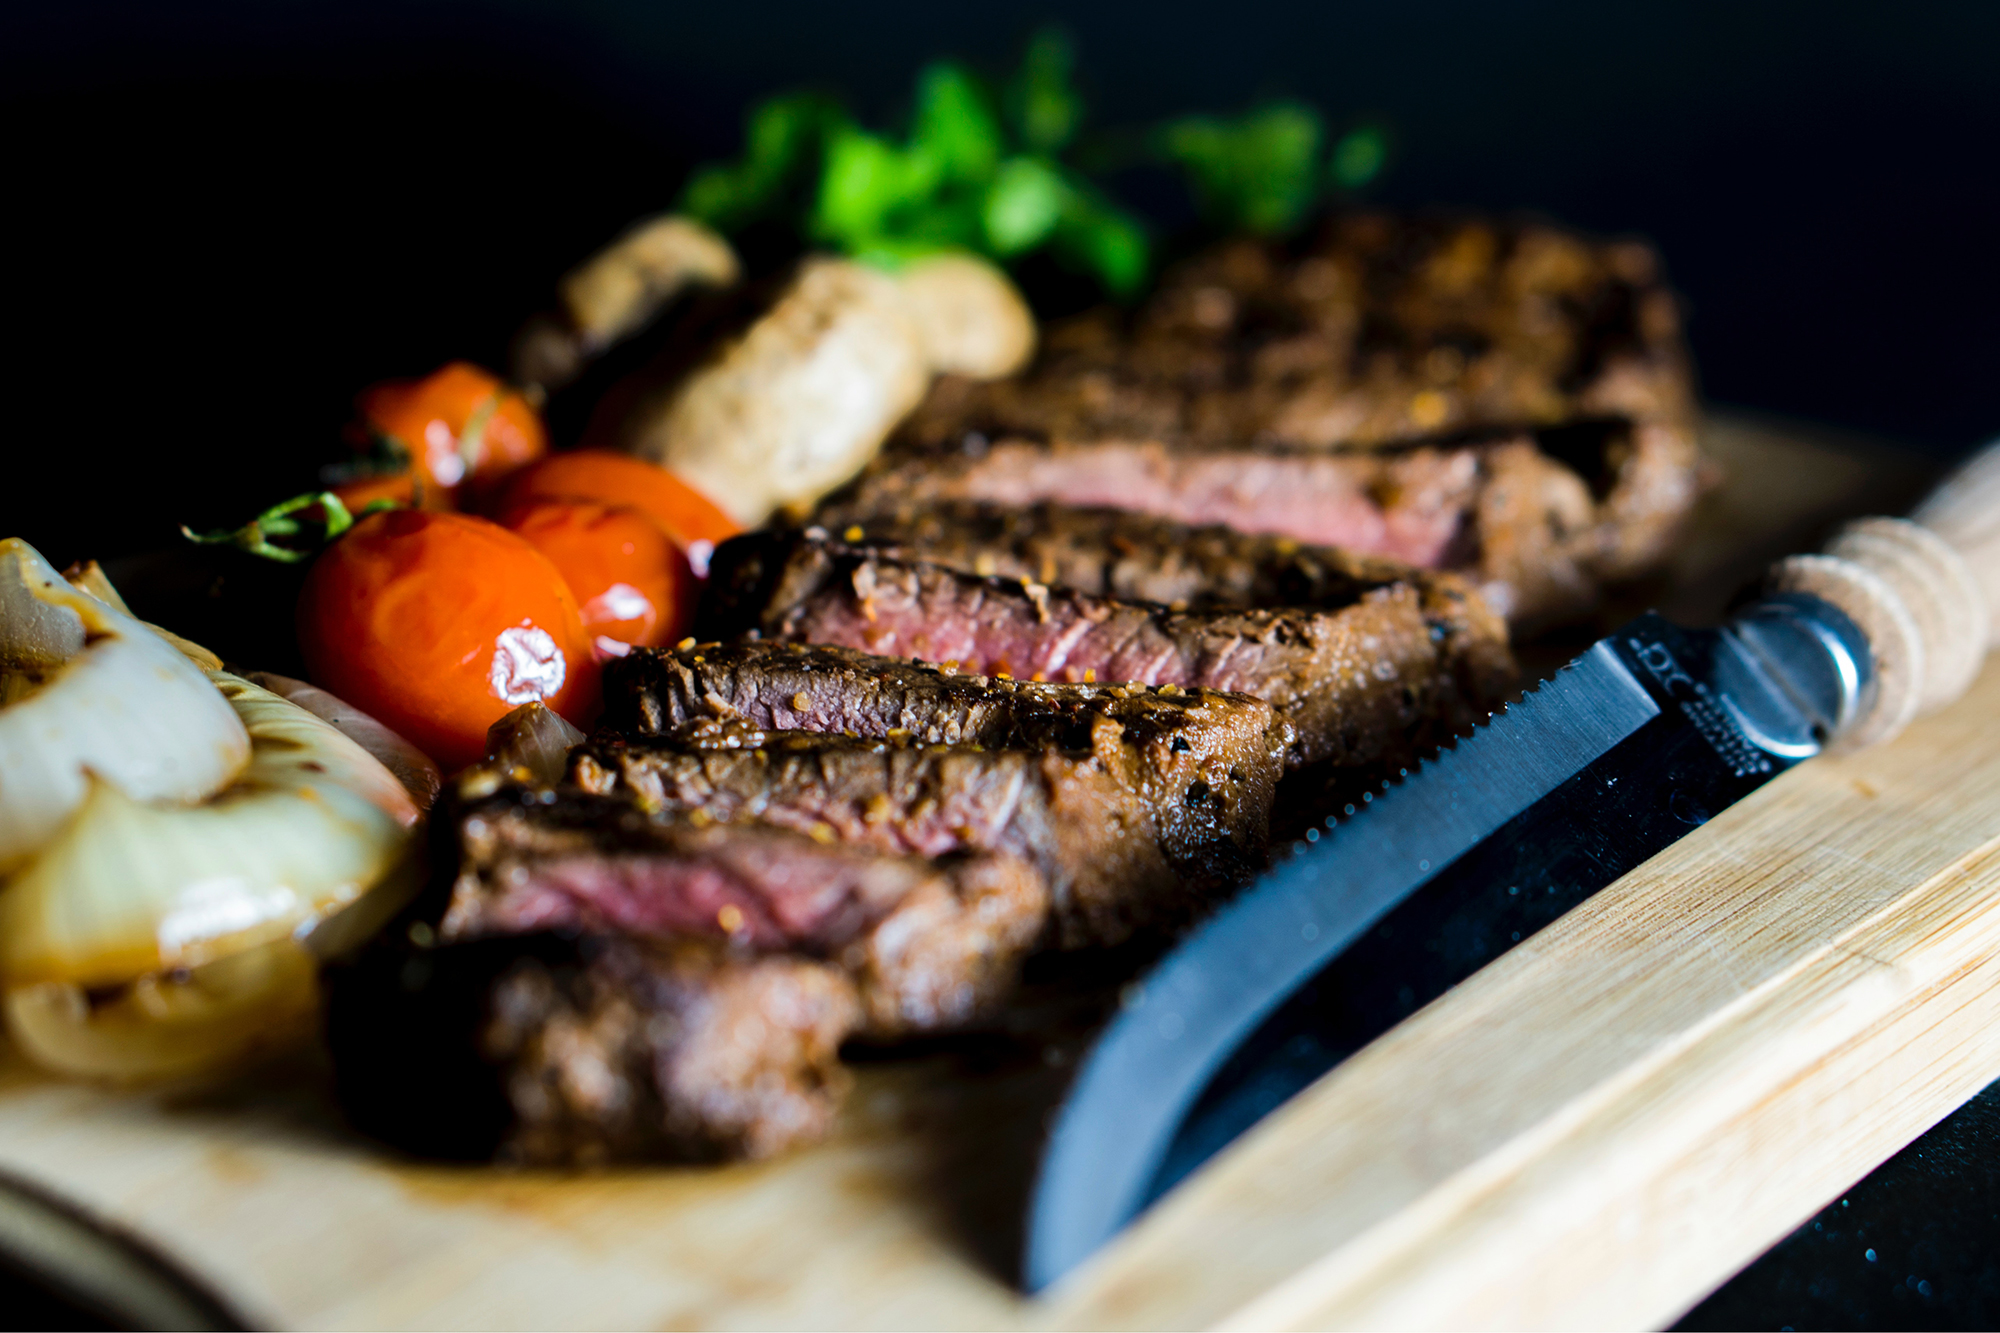 Grilling Steak: Tips for Buying the Best Cut of Beef